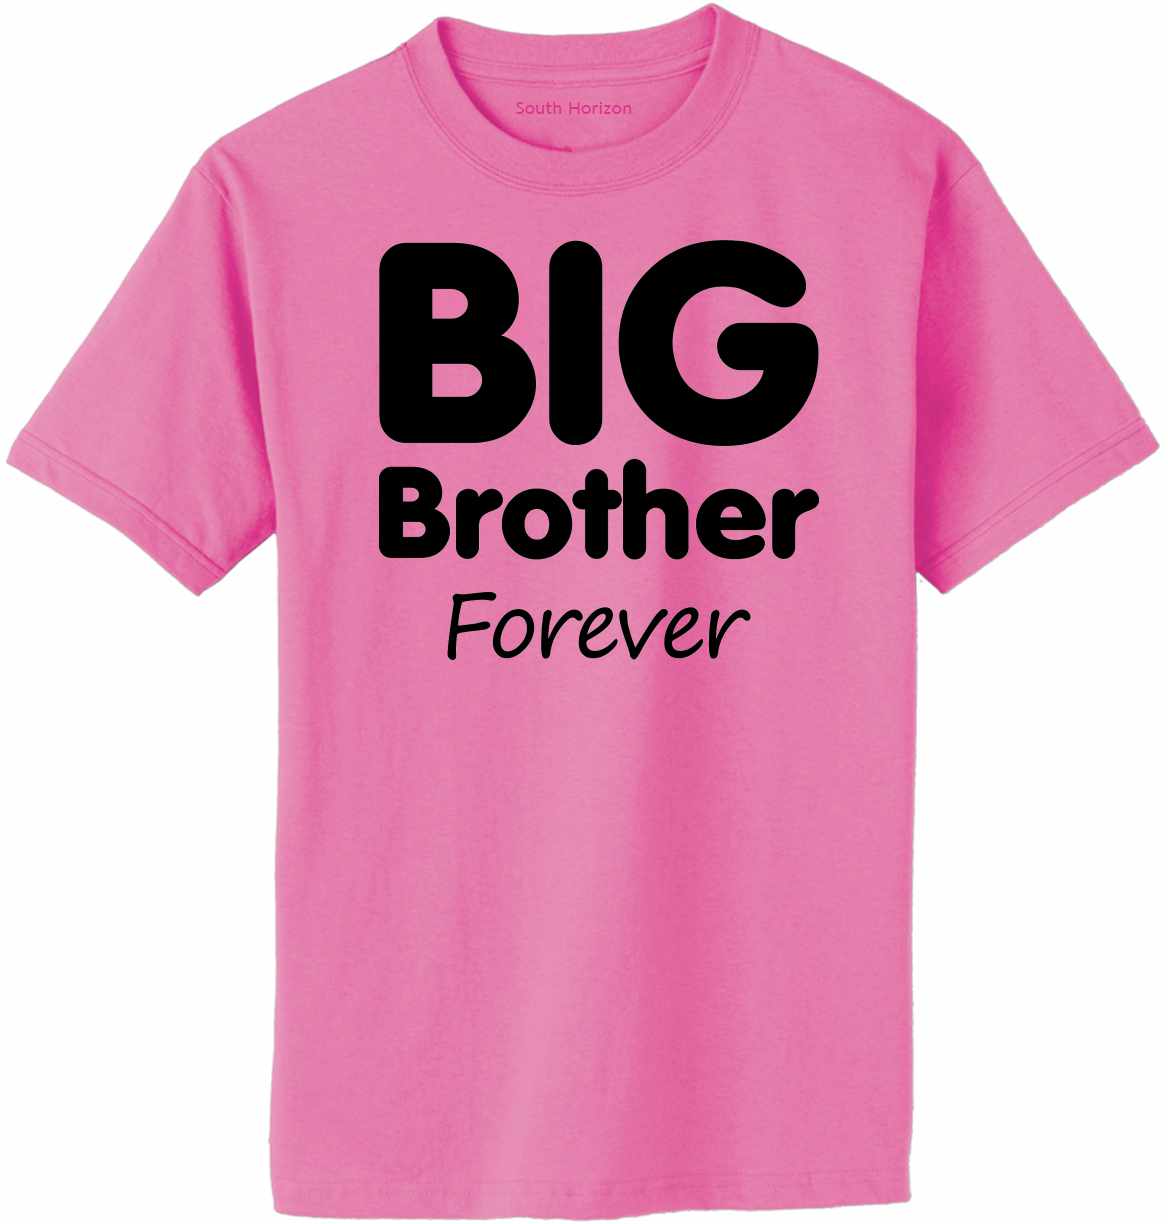 Big Brother Forever Adult T-Shirt